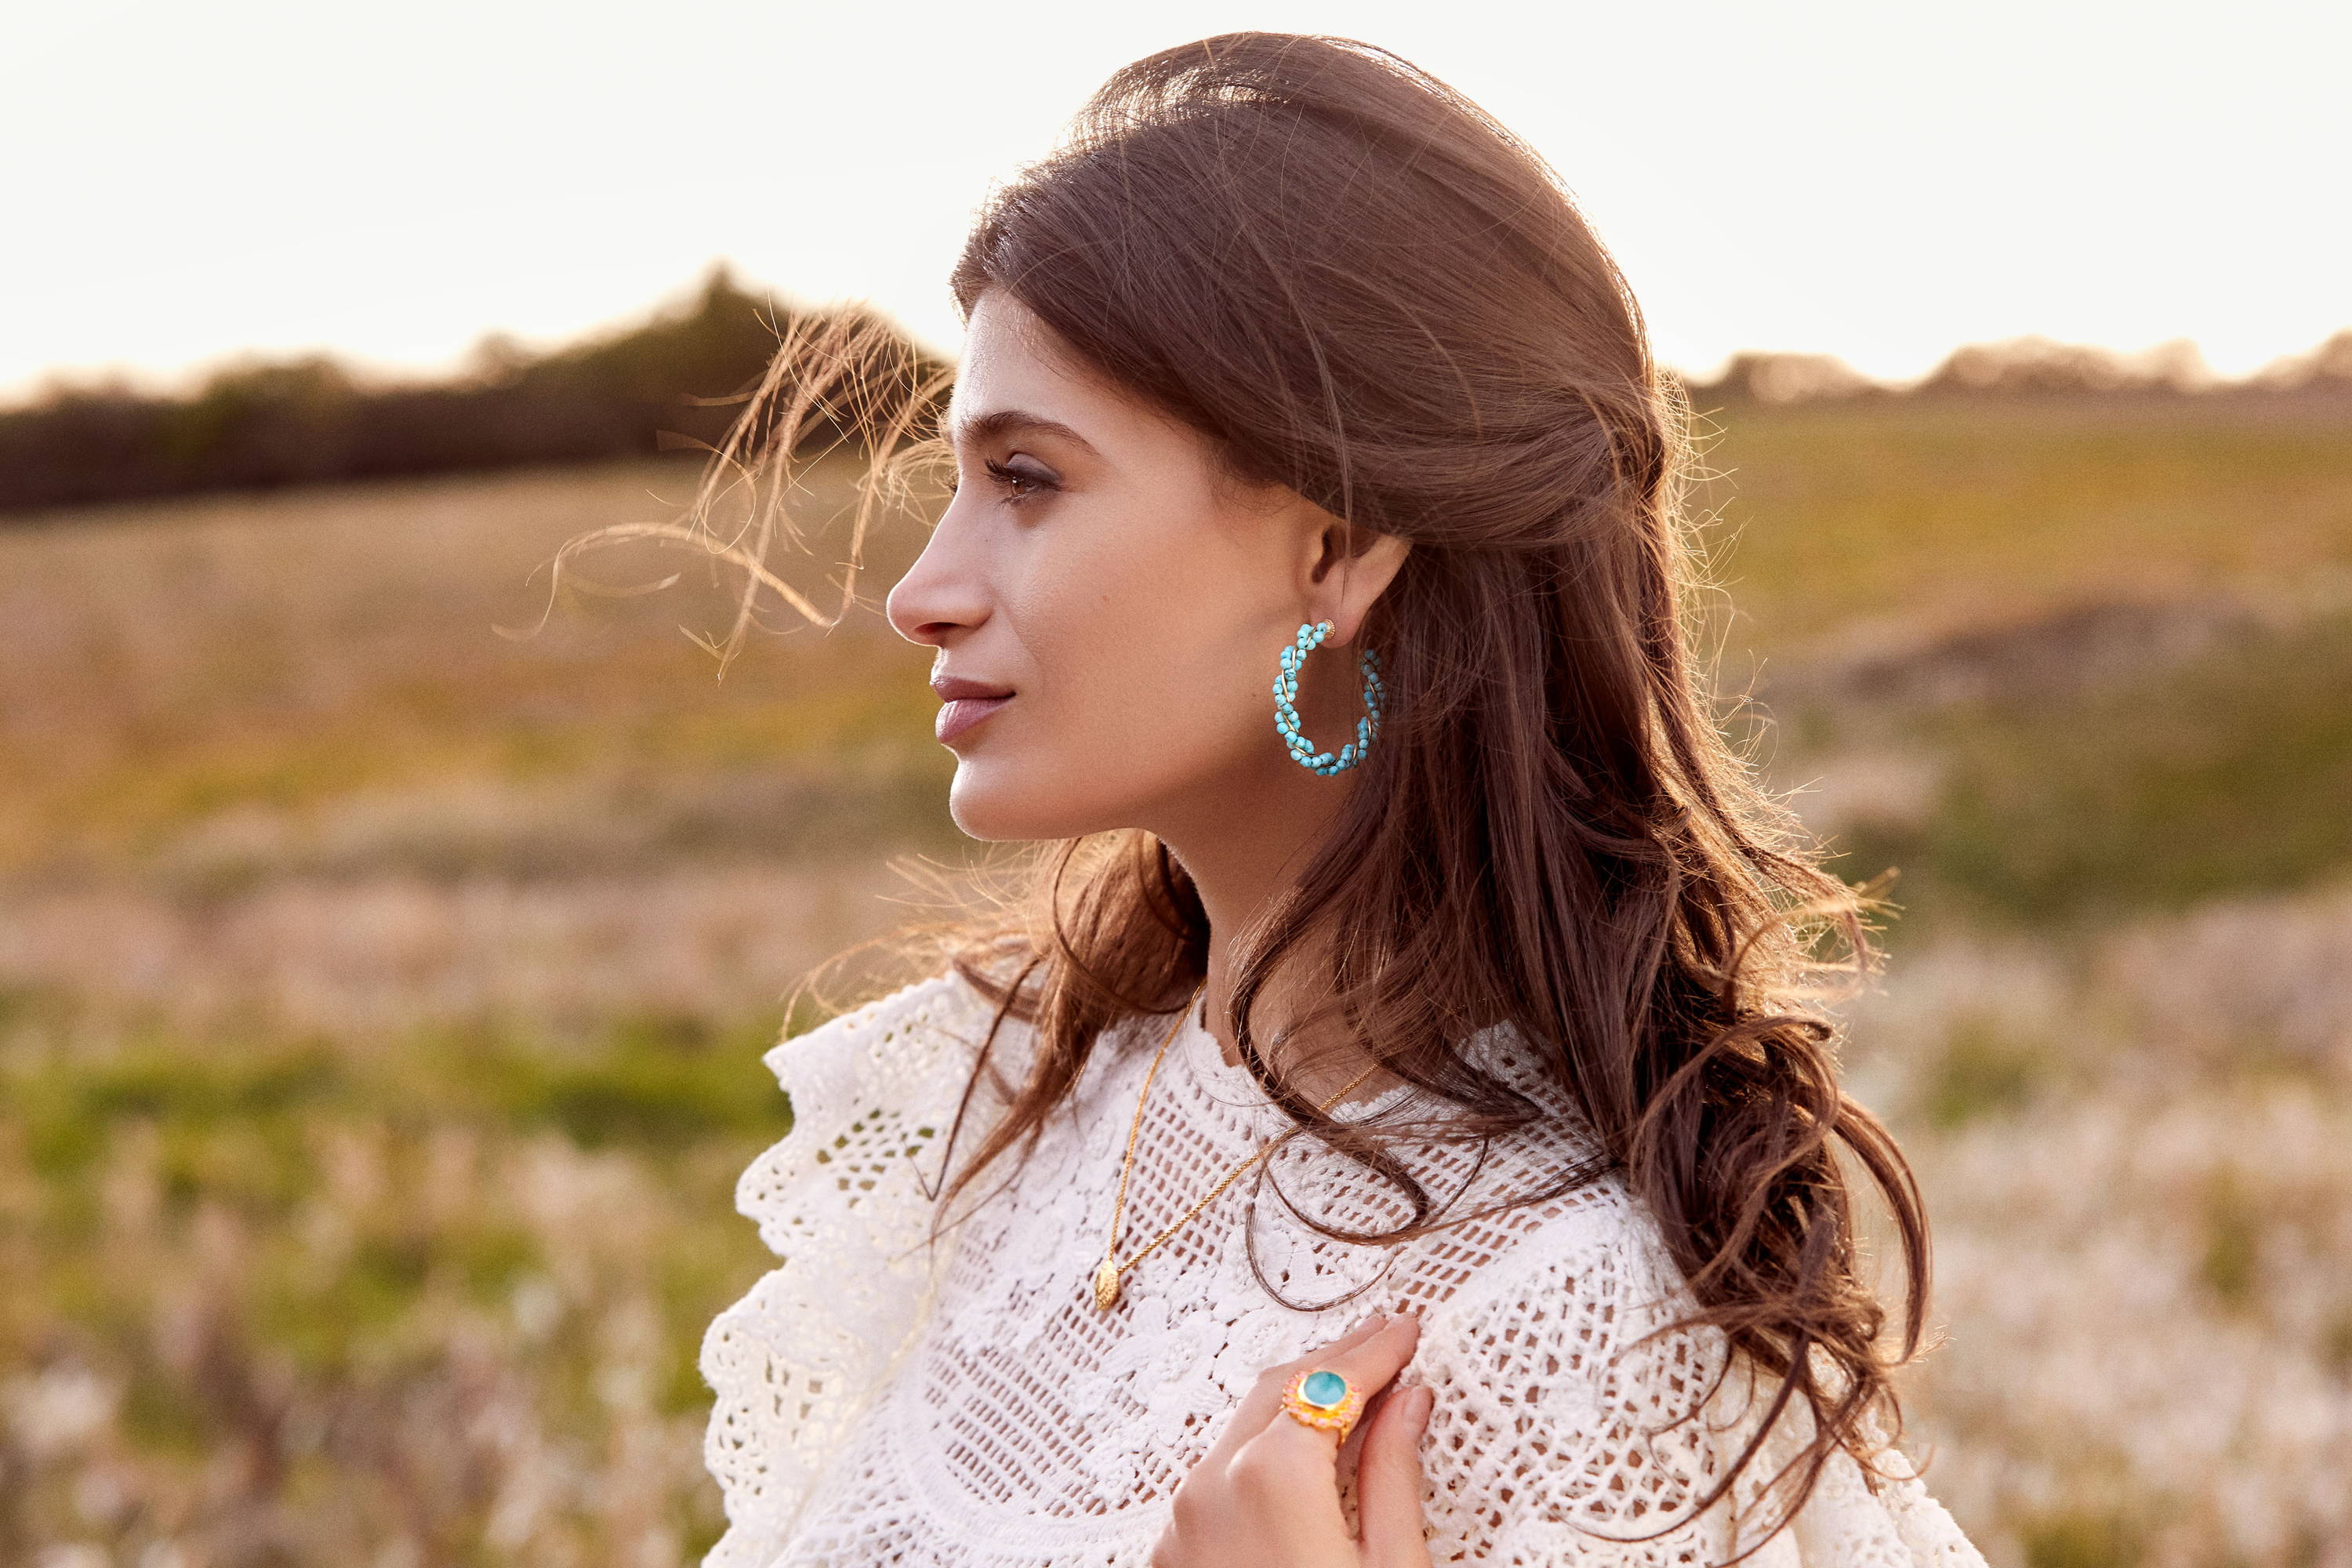 Cairo wears the Gia Turquoise Hoop Earrings and Coral and Aqua Ring